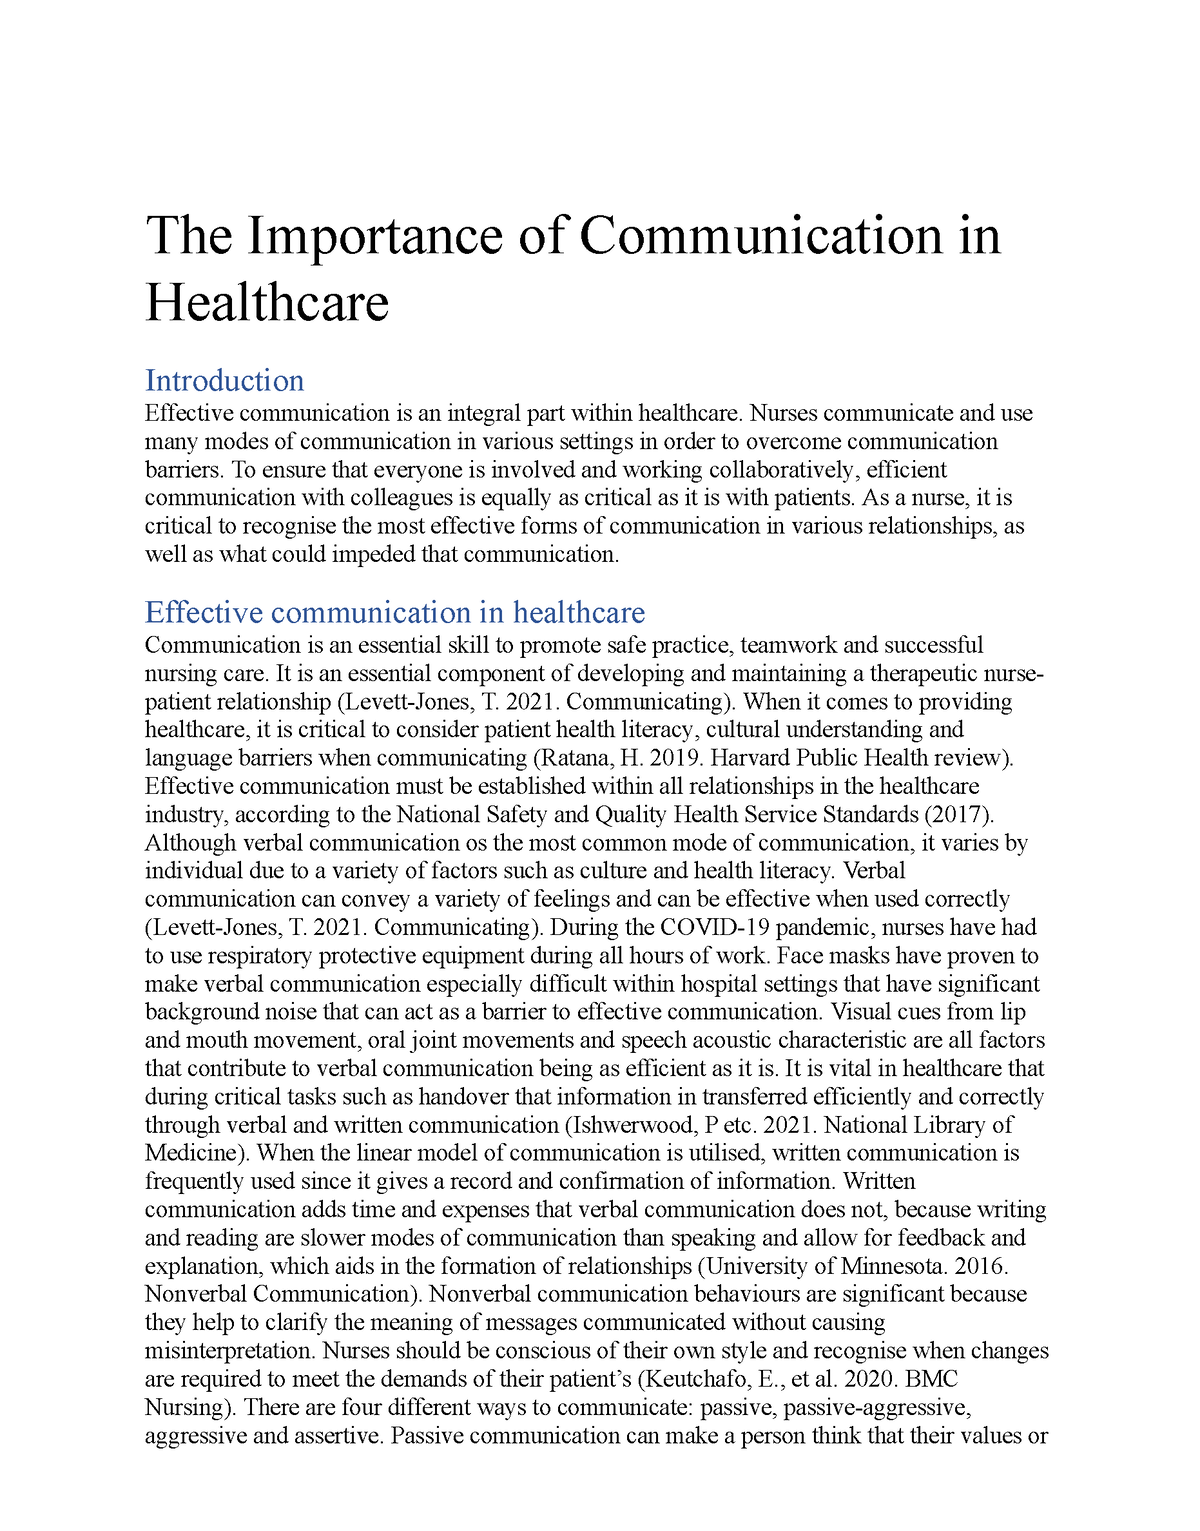 effects of poor communication in healthcare essay